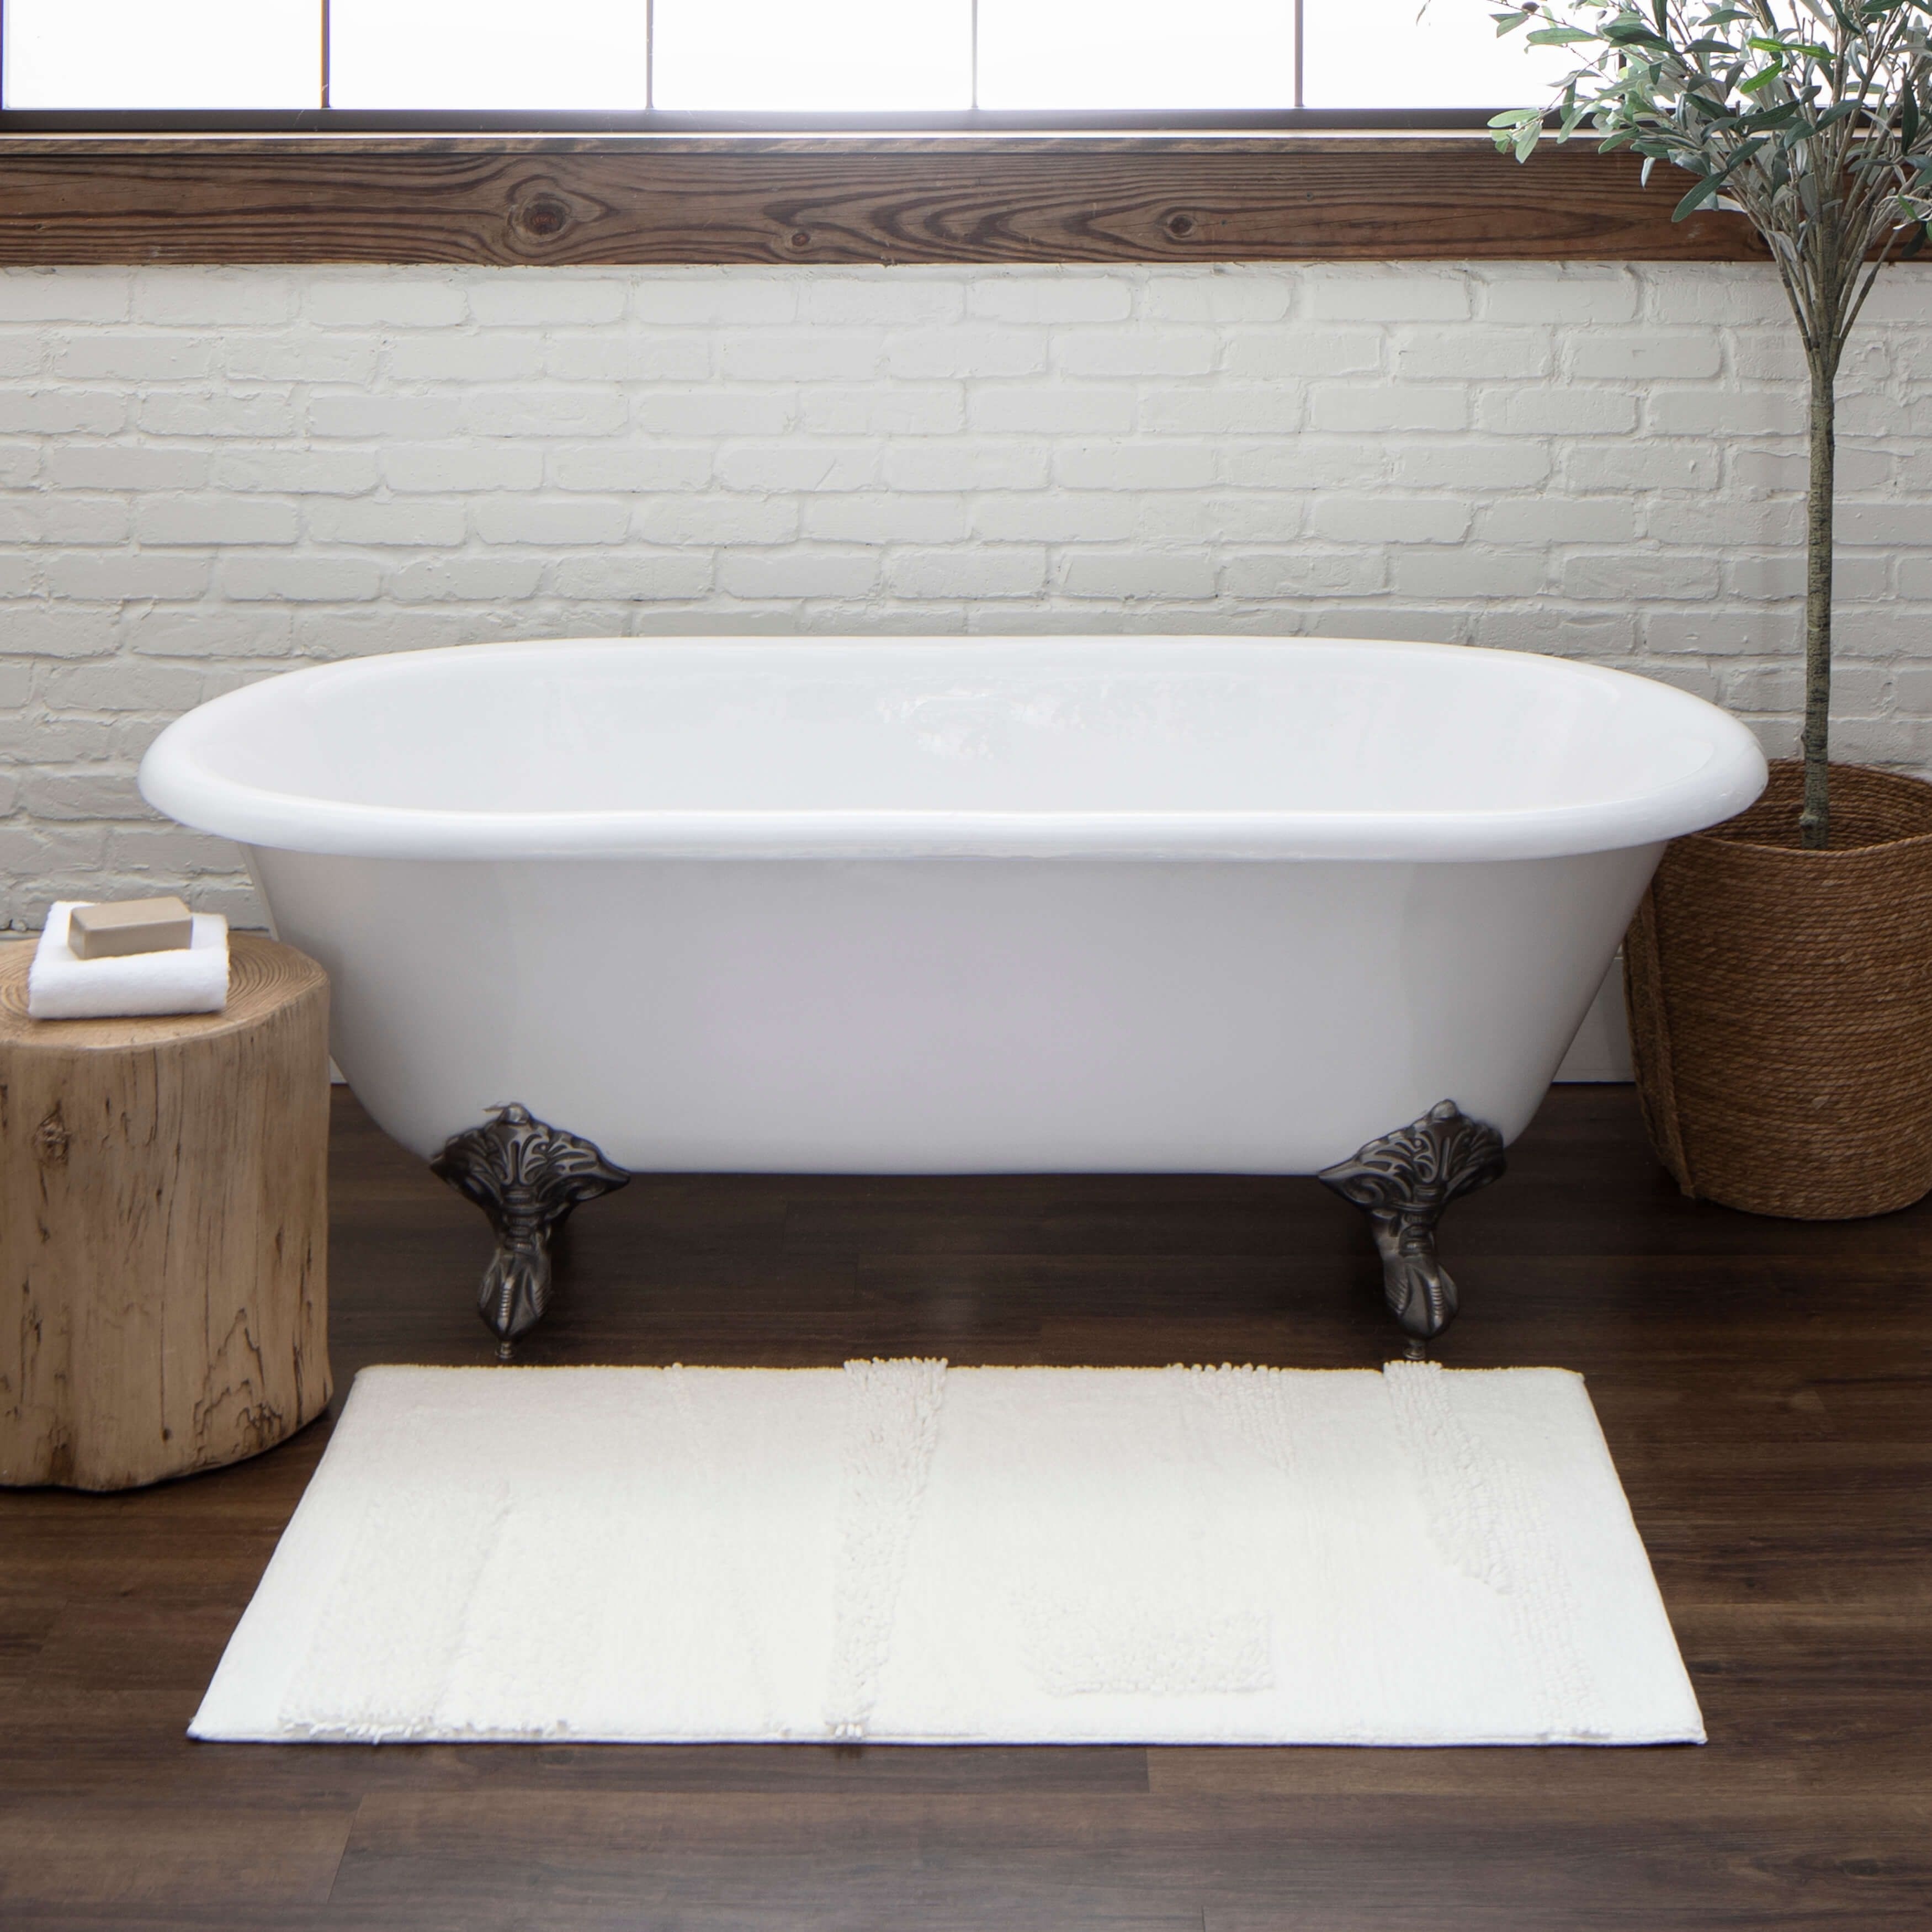 https://ak1.ostkcdn.com/images/products/is/images/direct/2c18ac0c45f108436115f6dd44378528f434595c/Mohawk-Home-Composition-Bath-Rug.jpg